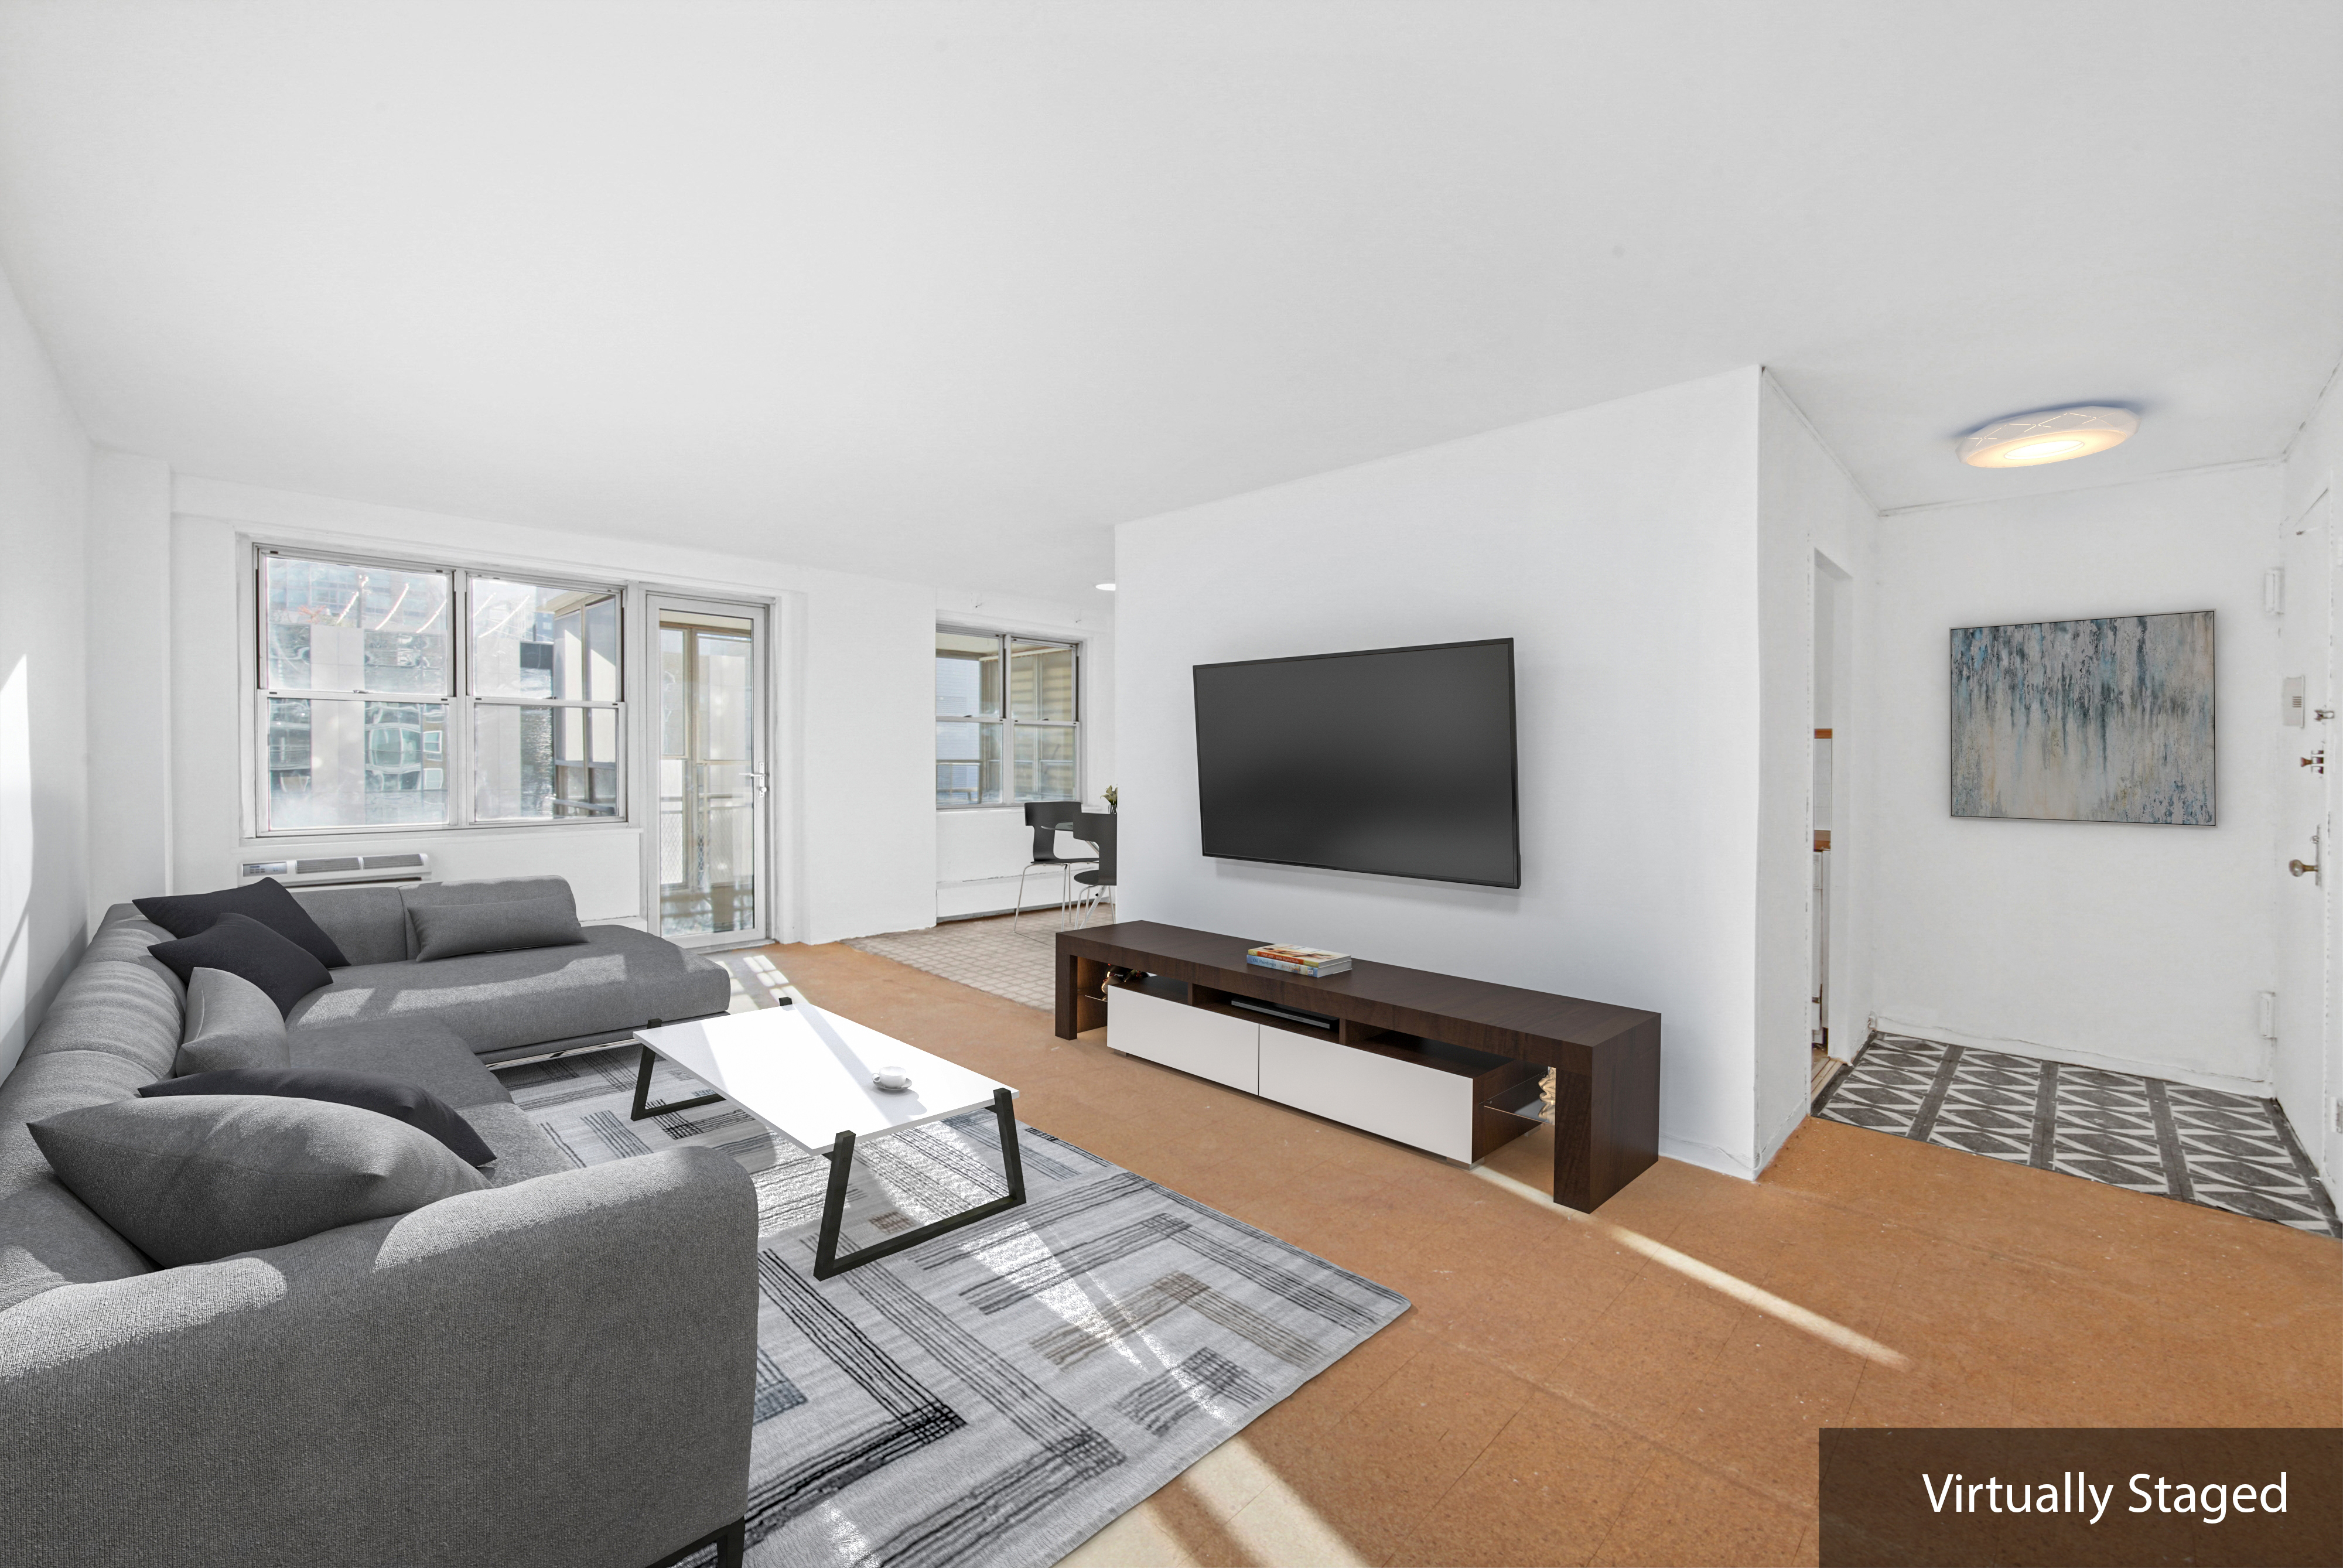 303 West 66th Street 11Jw, Lincoln Square, Upper West Side, NYC - 1 Bedrooms  
1 Bathrooms  
3 Rooms - 